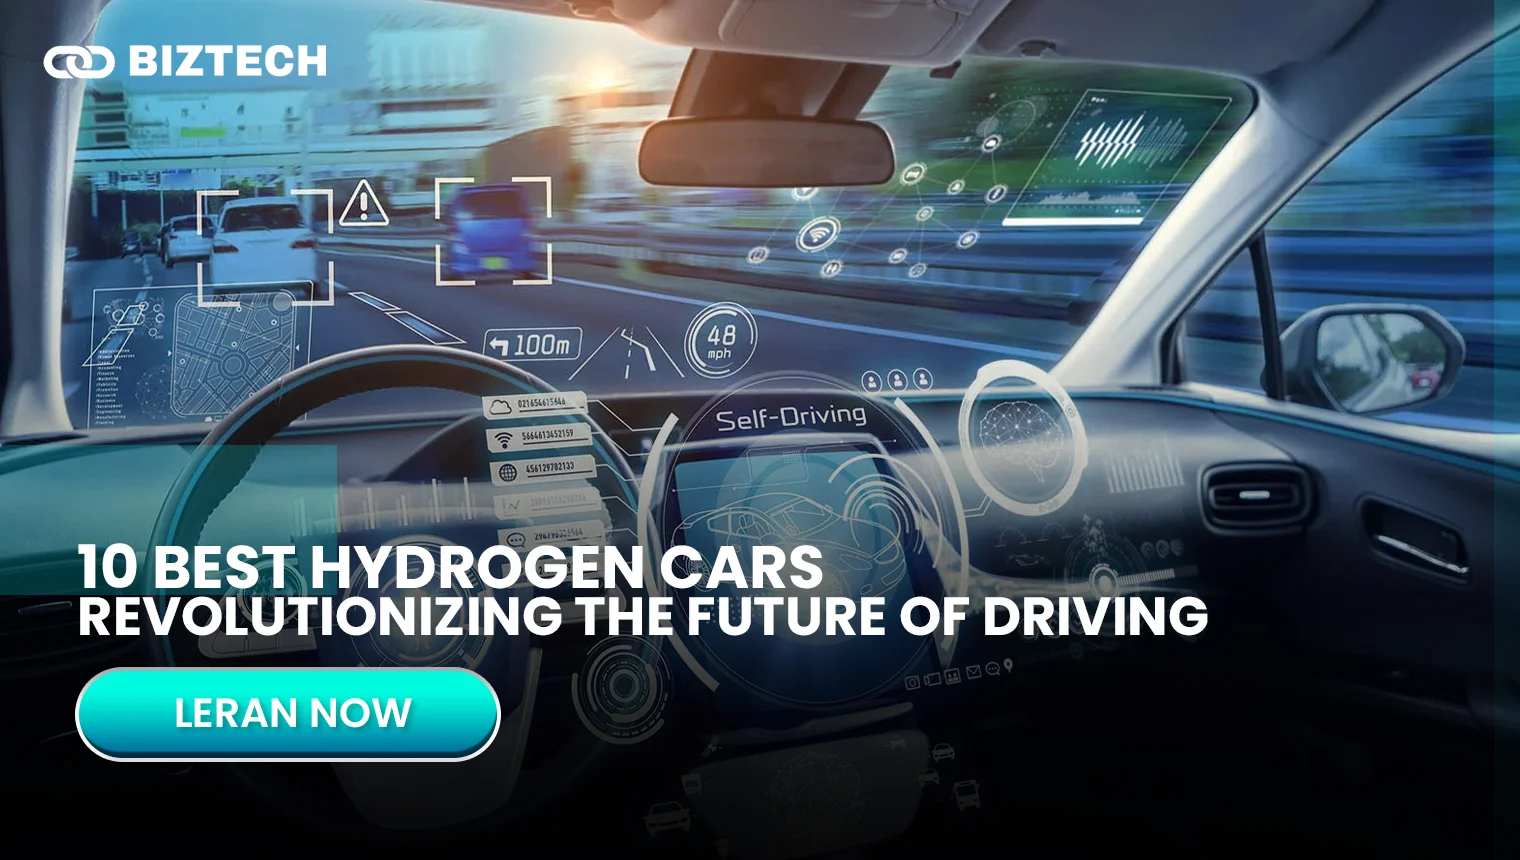 10 Best Hydrogen Cars Revolutionizing the Future of Driving